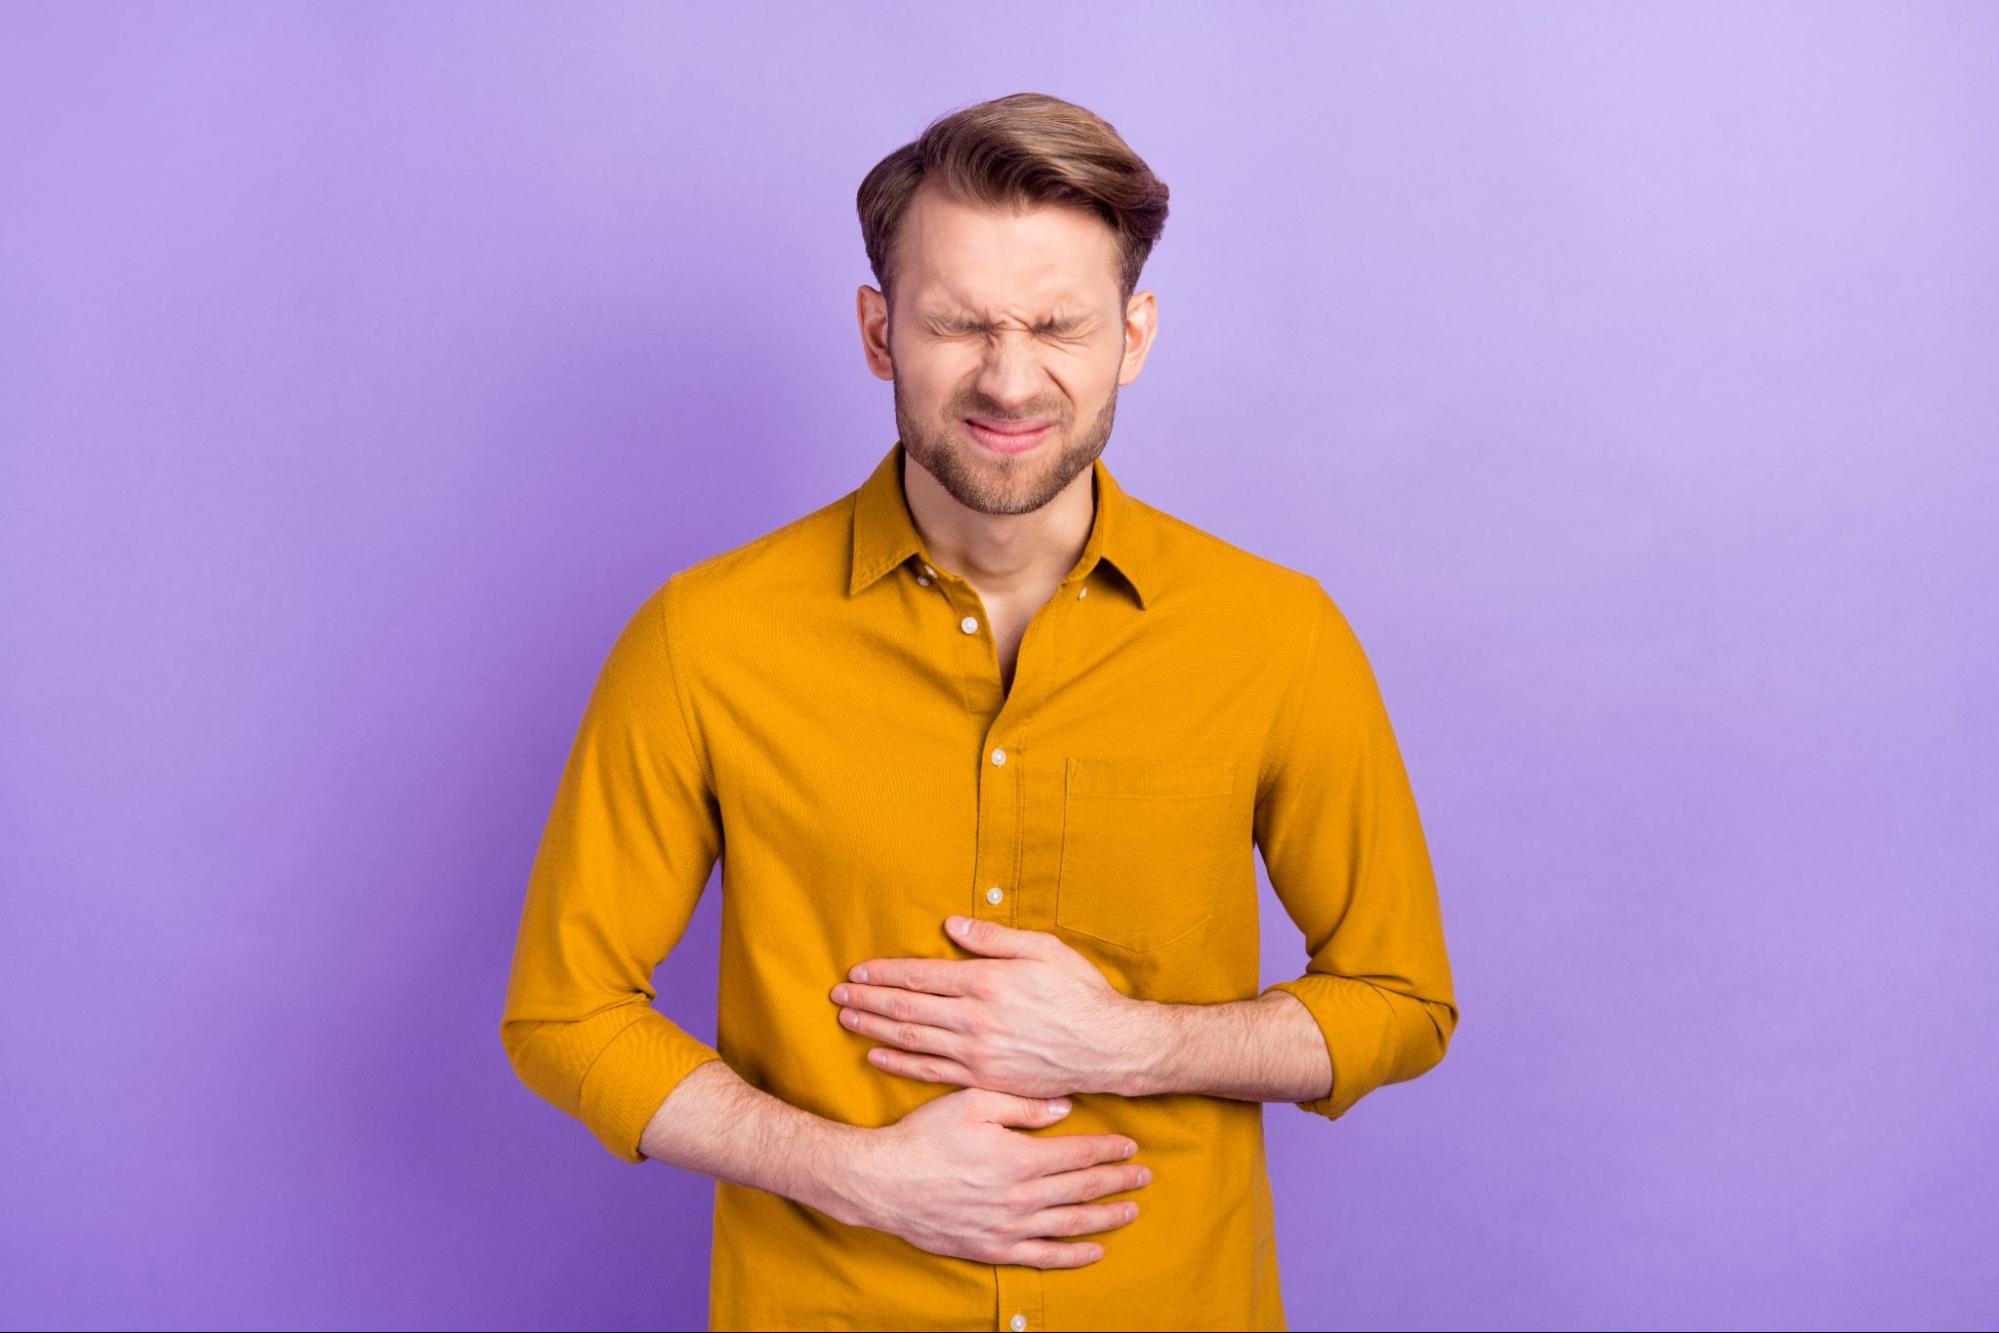 Man in yellow shirt on a purple background with eyes squeezed closed and hands on his stomach due to stomach ache 